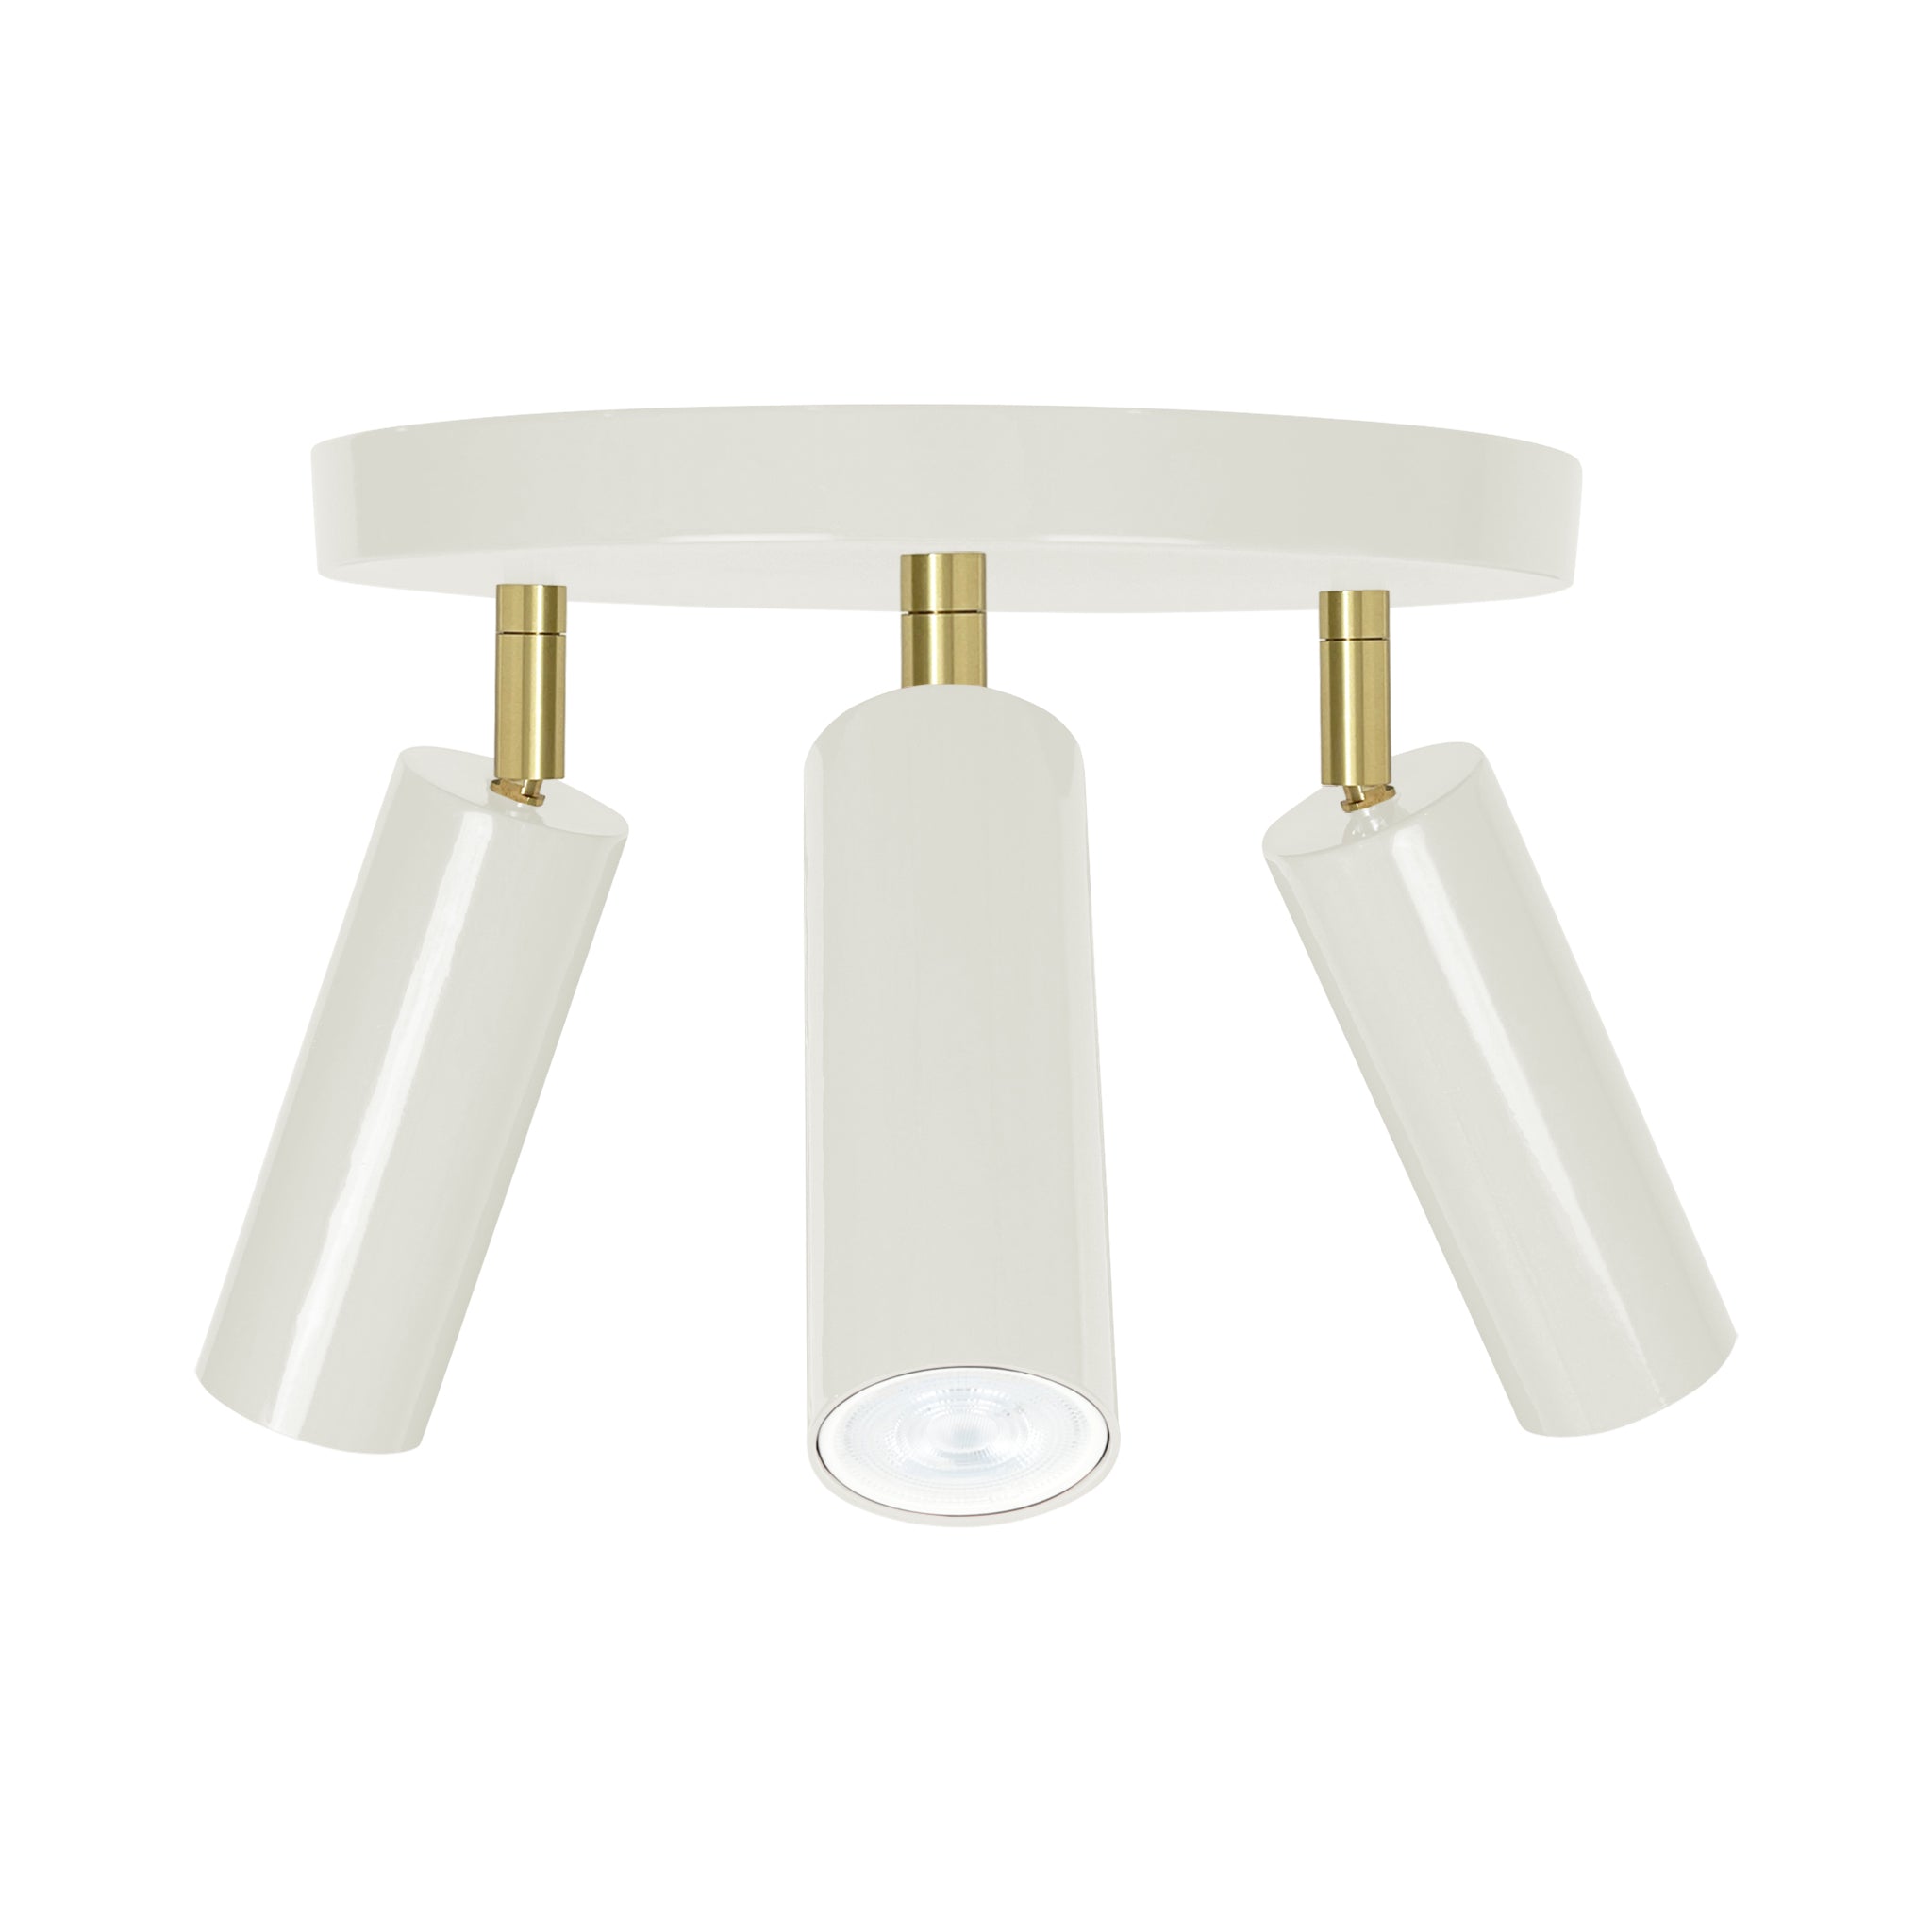 Brass and bone color Pose flush mount Dutton Brown lighting